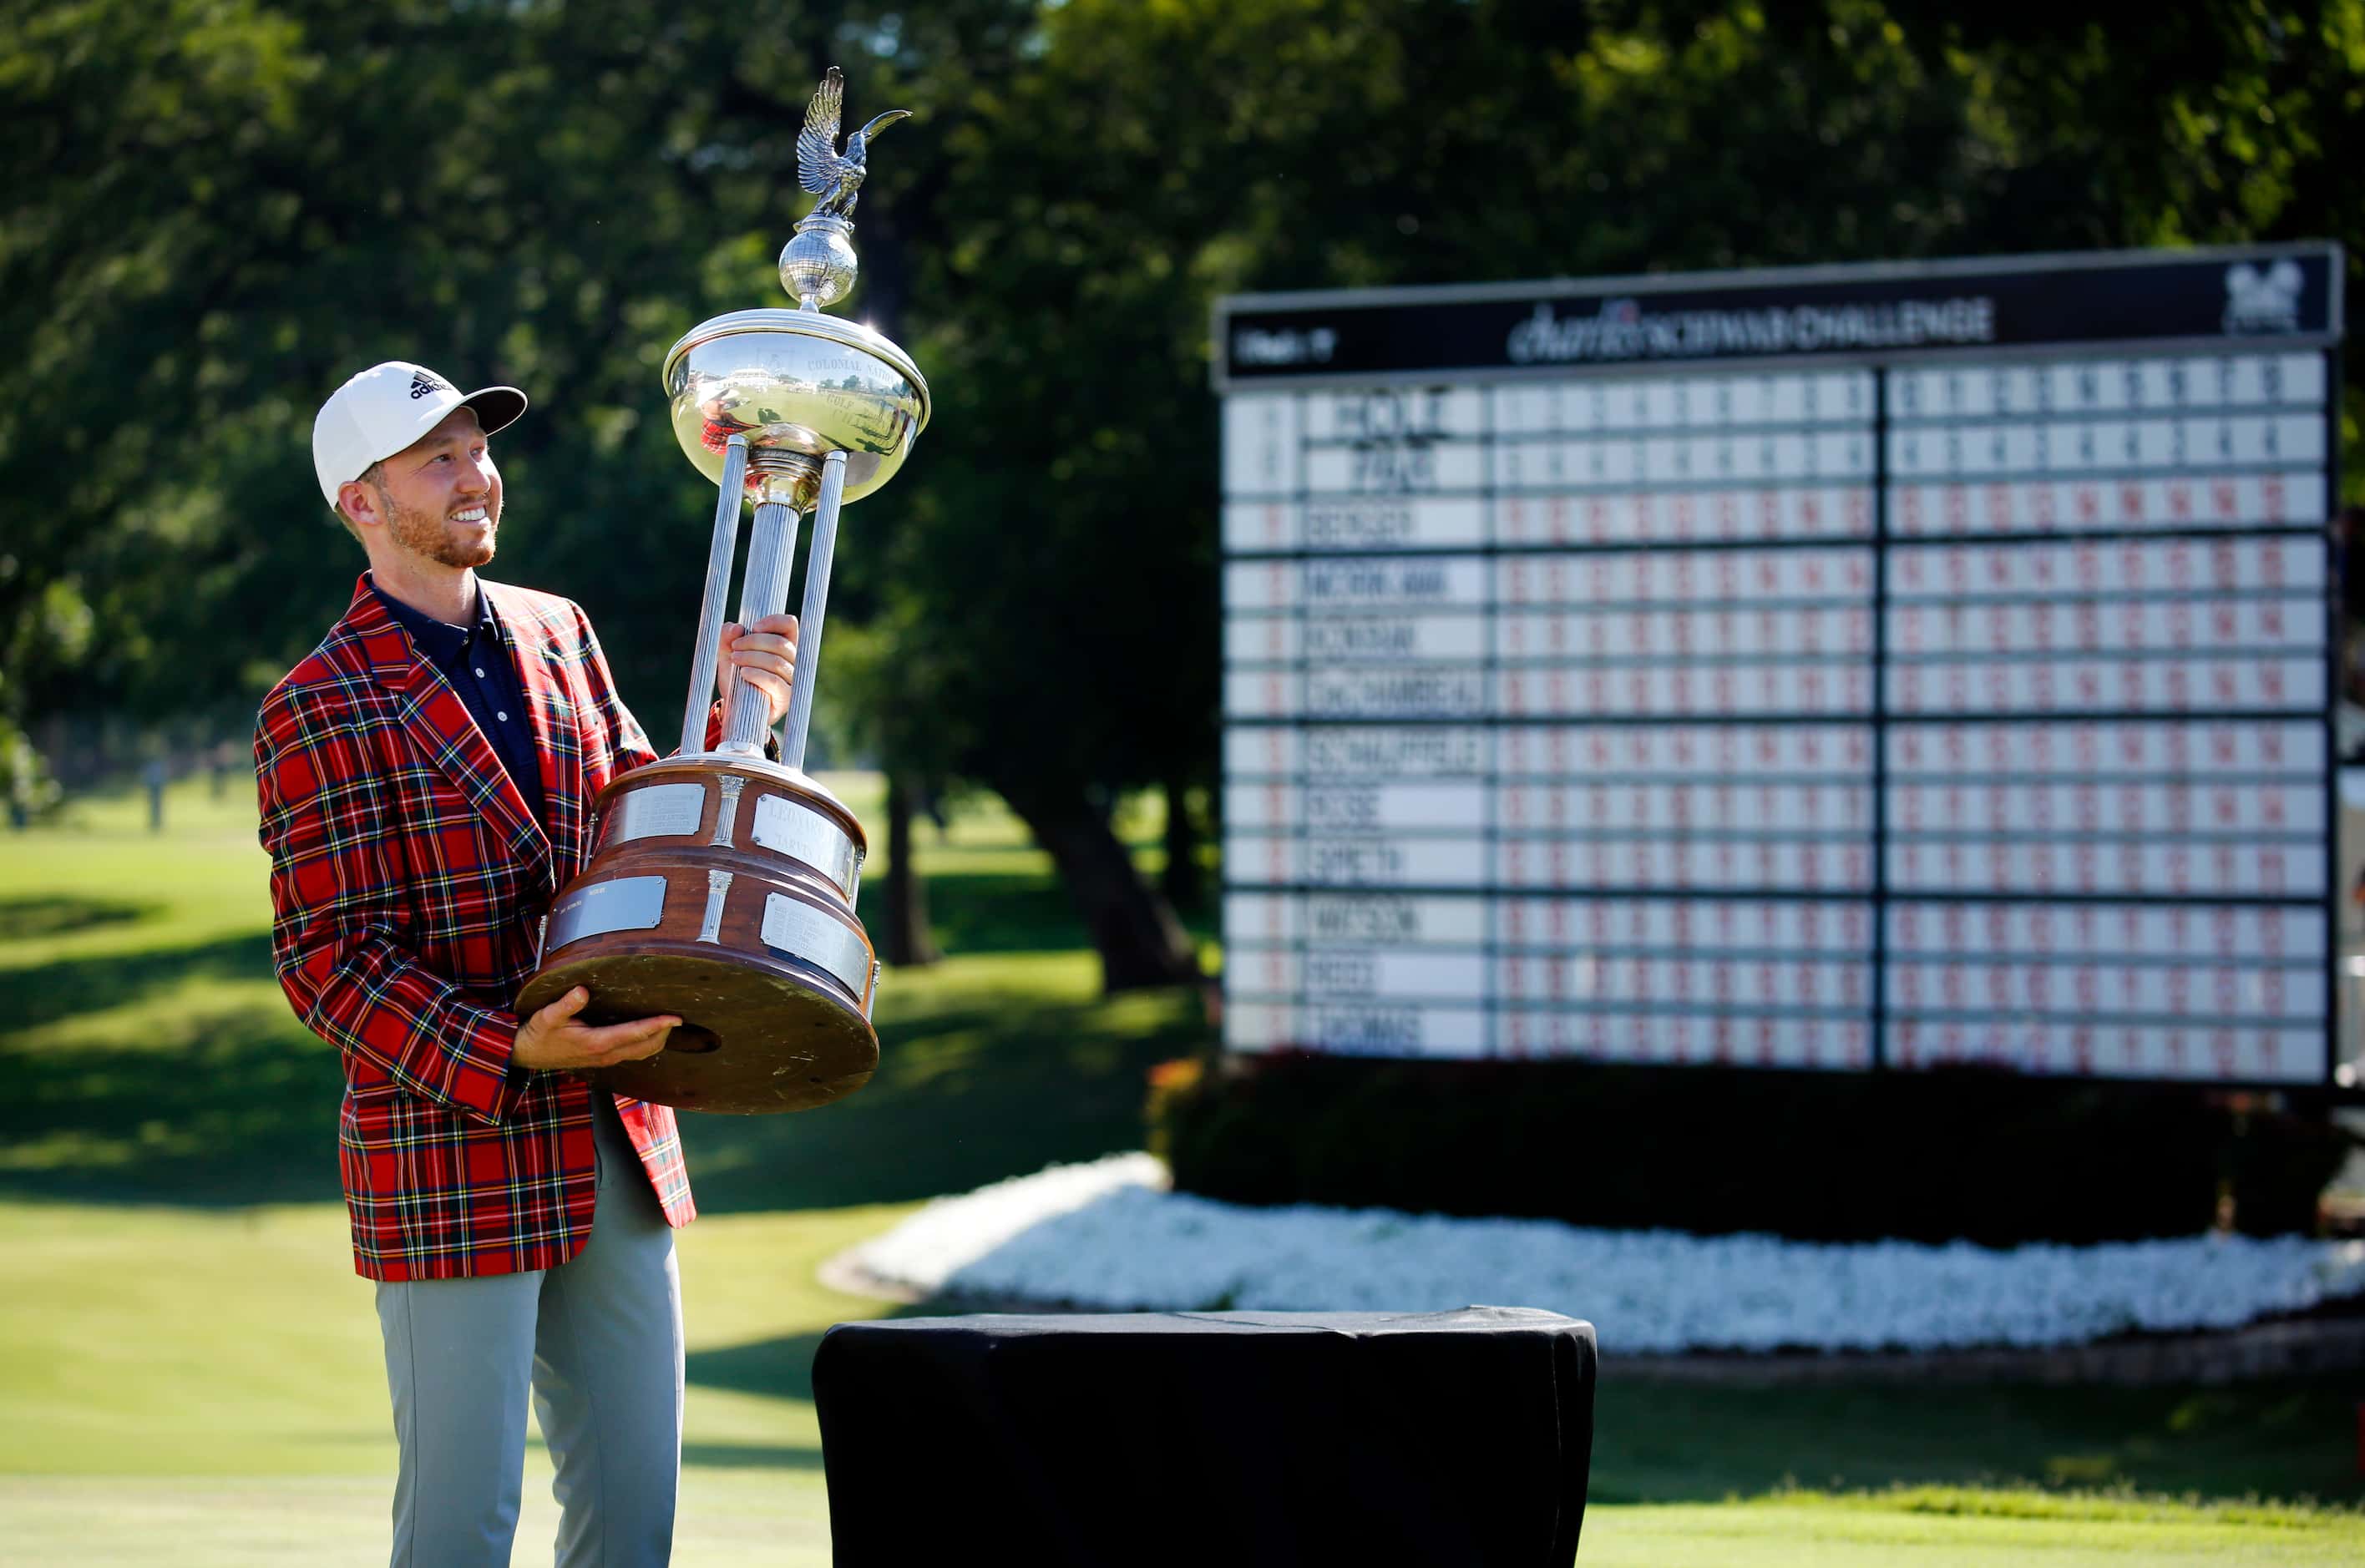 On the 18th green, PGA Tour golfer Daniel Berger poses with in the Leonard Trophy after...